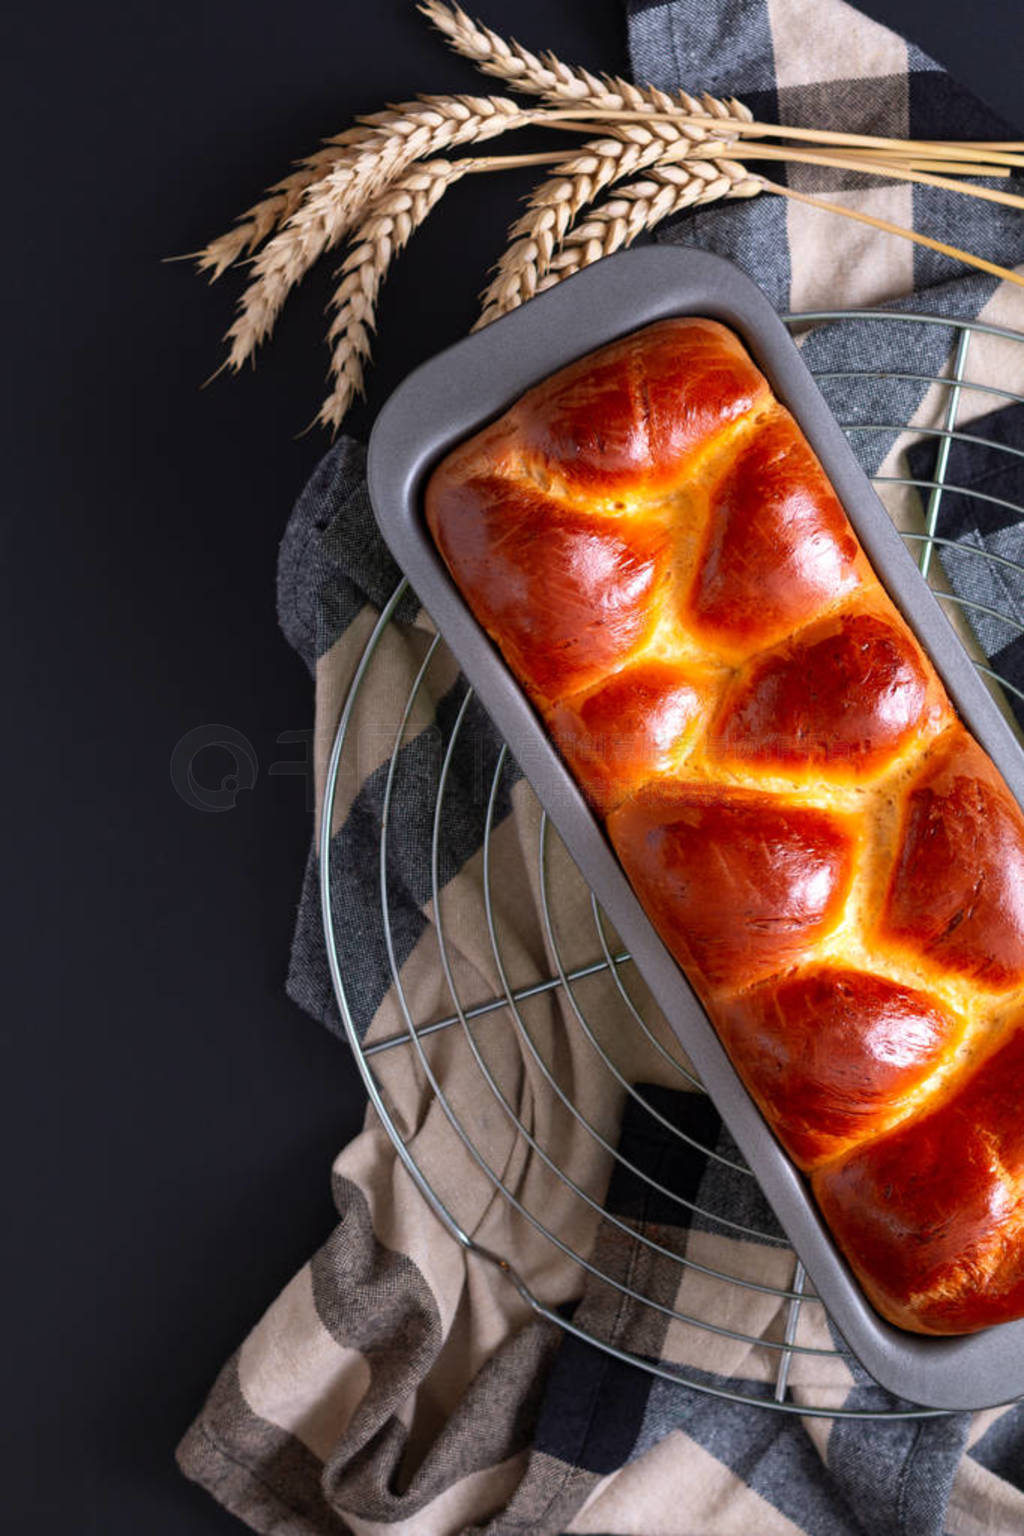 Food bakery concept Fresh baked brioche Braided Bread loaf with